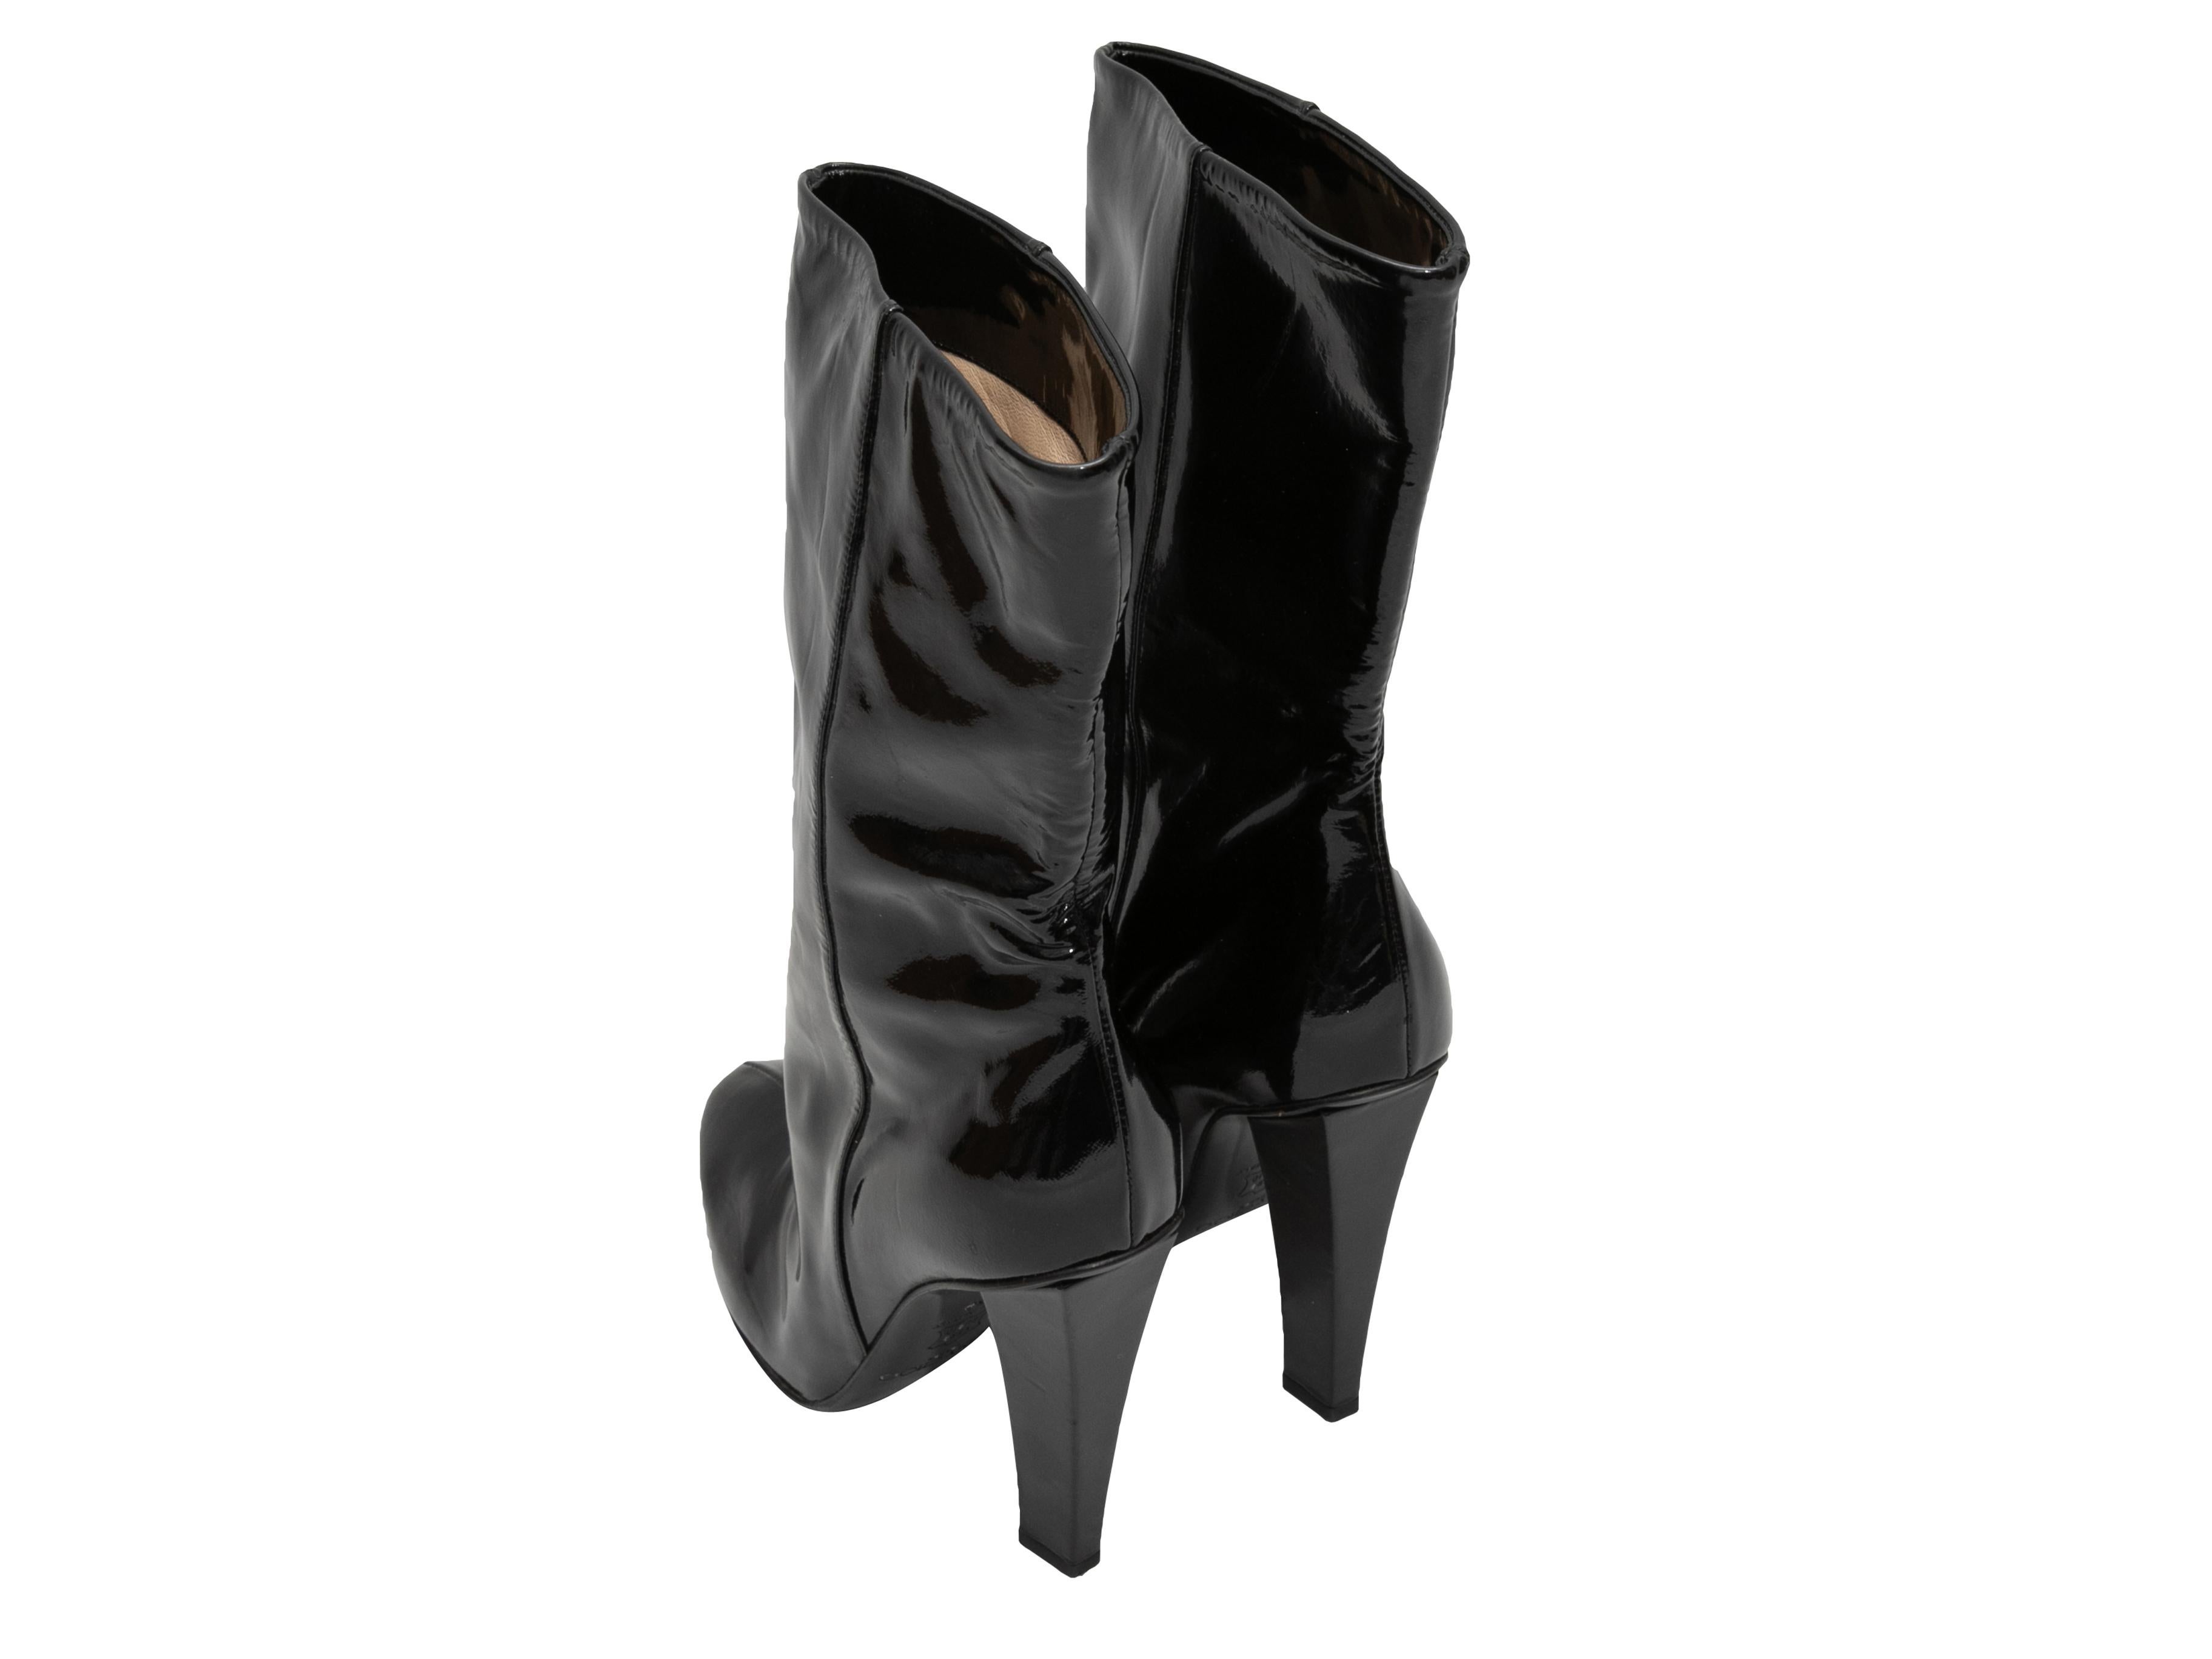 Black Jimmy Choo Patent Leather Heeled Boots Size 38 In Good Condition For Sale In New York, NY